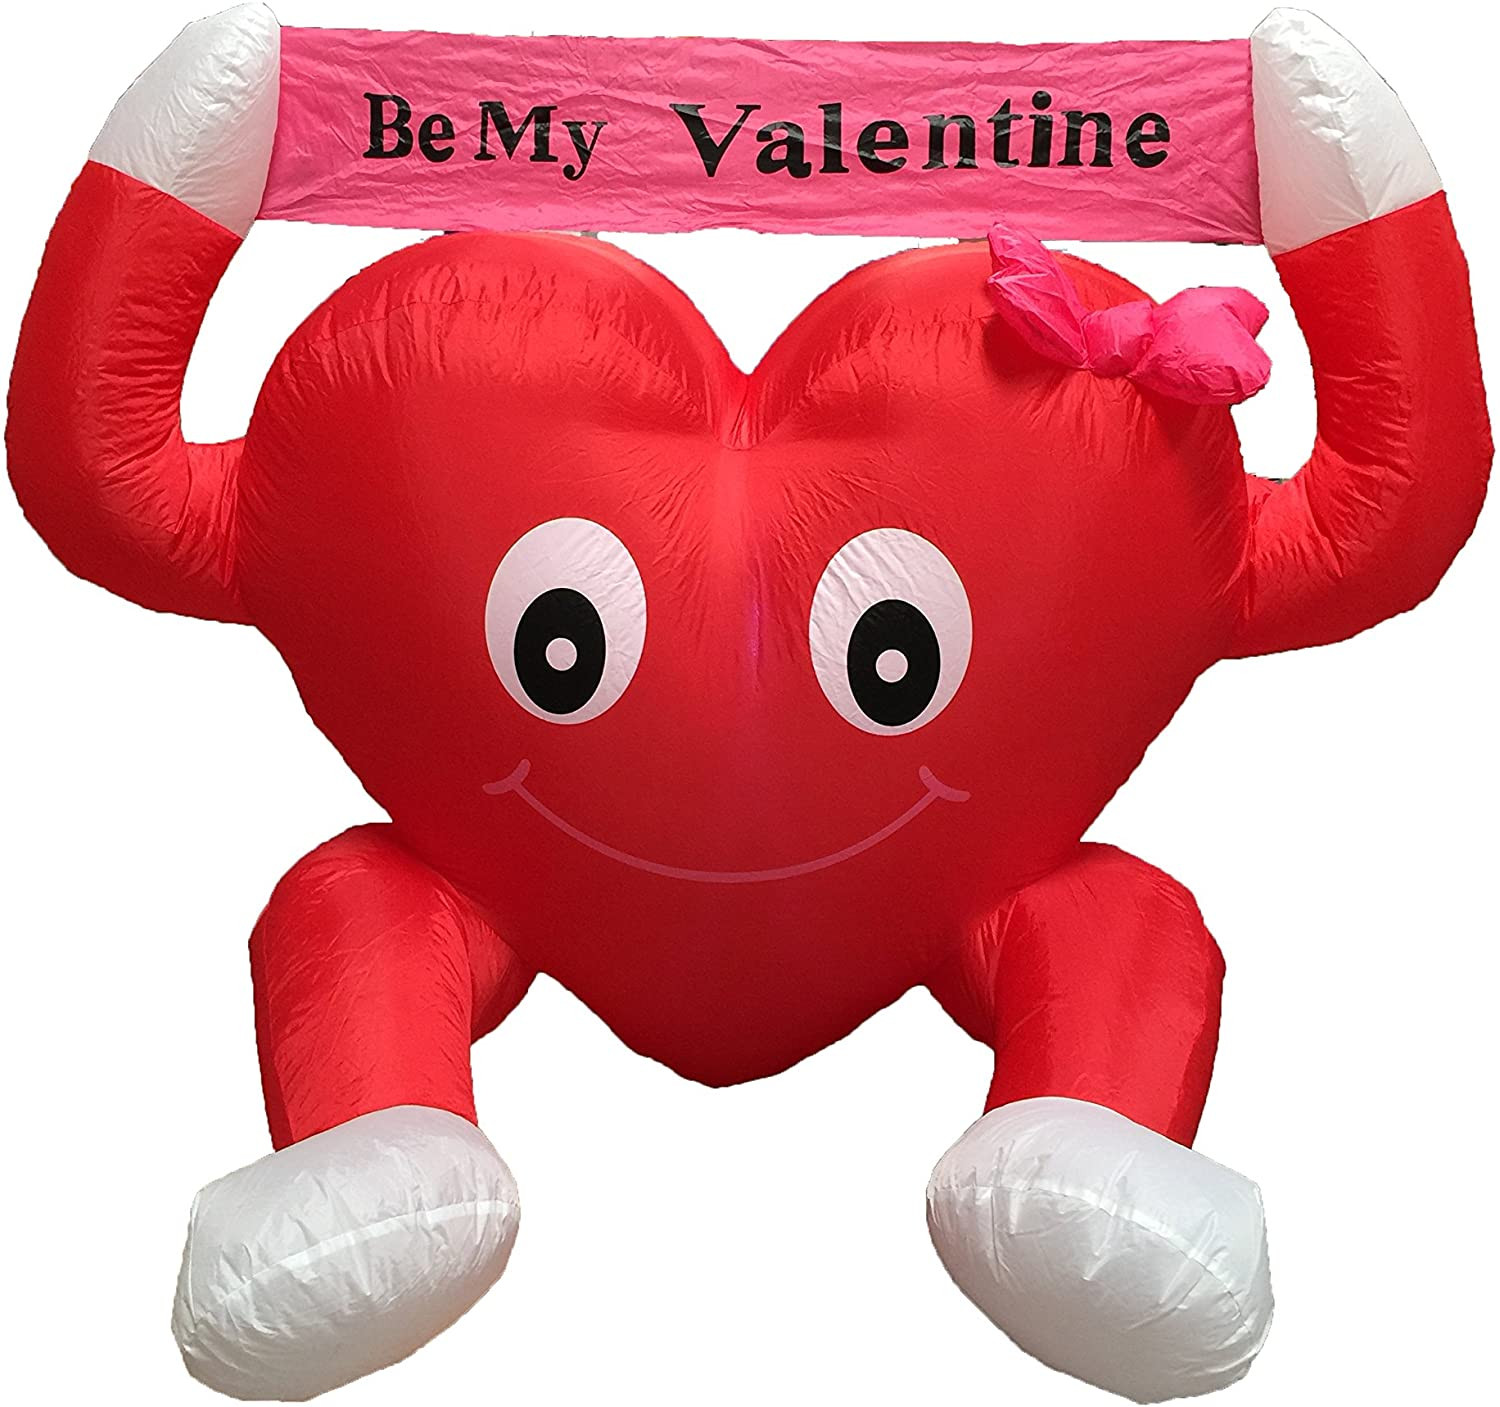 Be My Valentine Gift Ideas
 Amazon 4 Foot Valentine s Inflatable Lovely Heart"Be